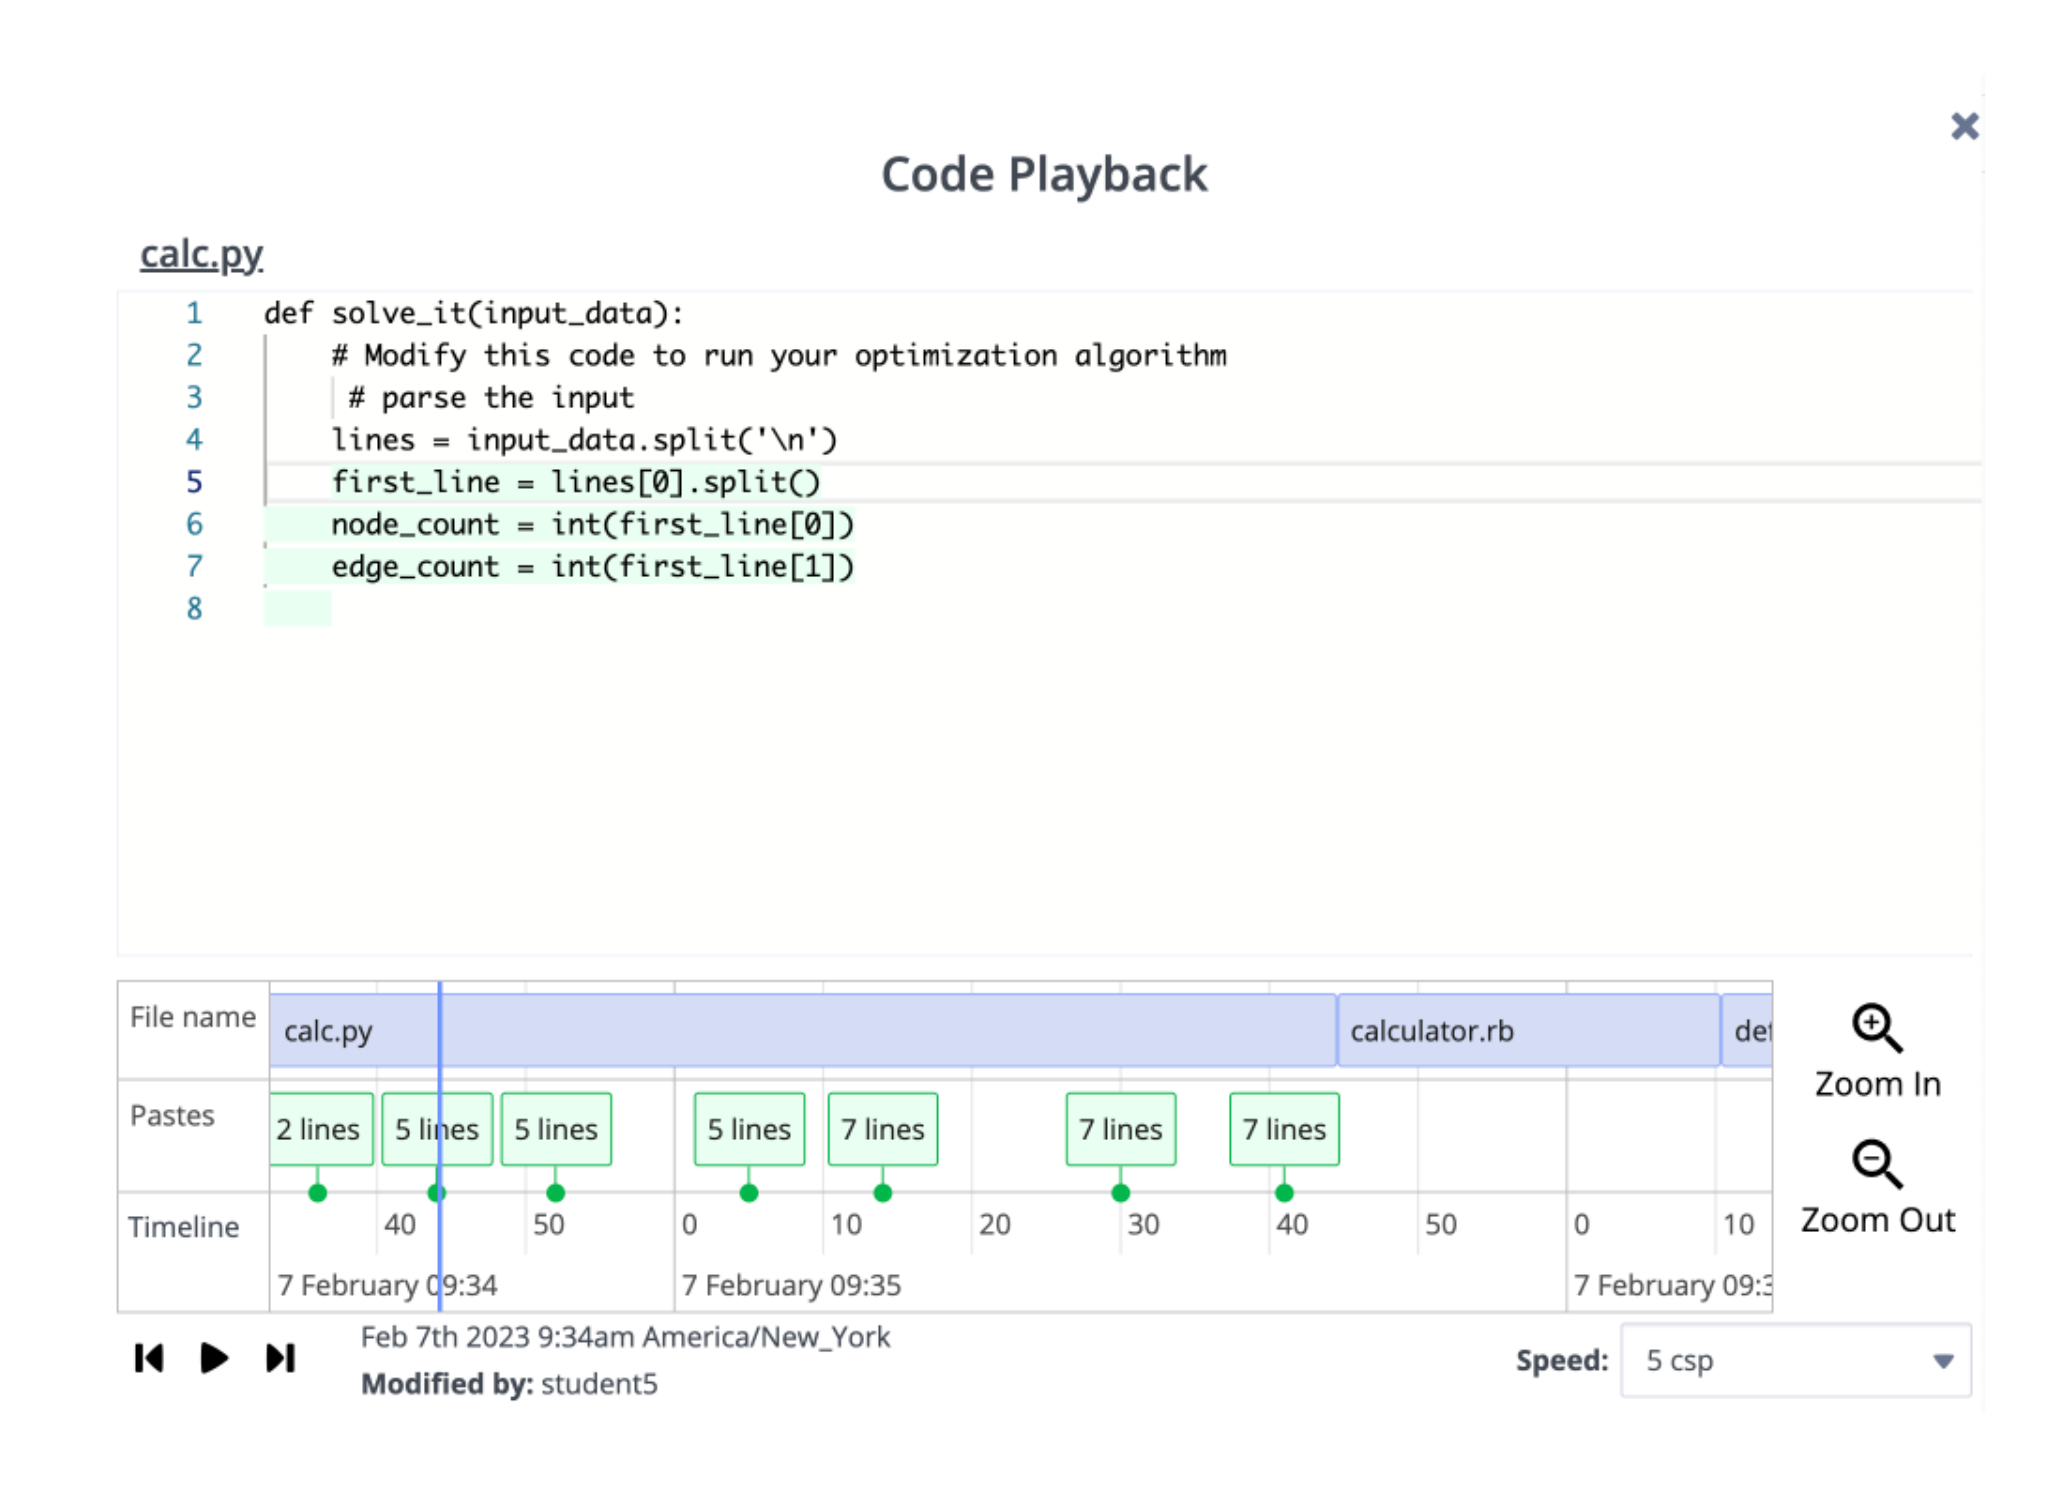 Code playback with code changes on top and a timeline underneath with file name and pastes indicated